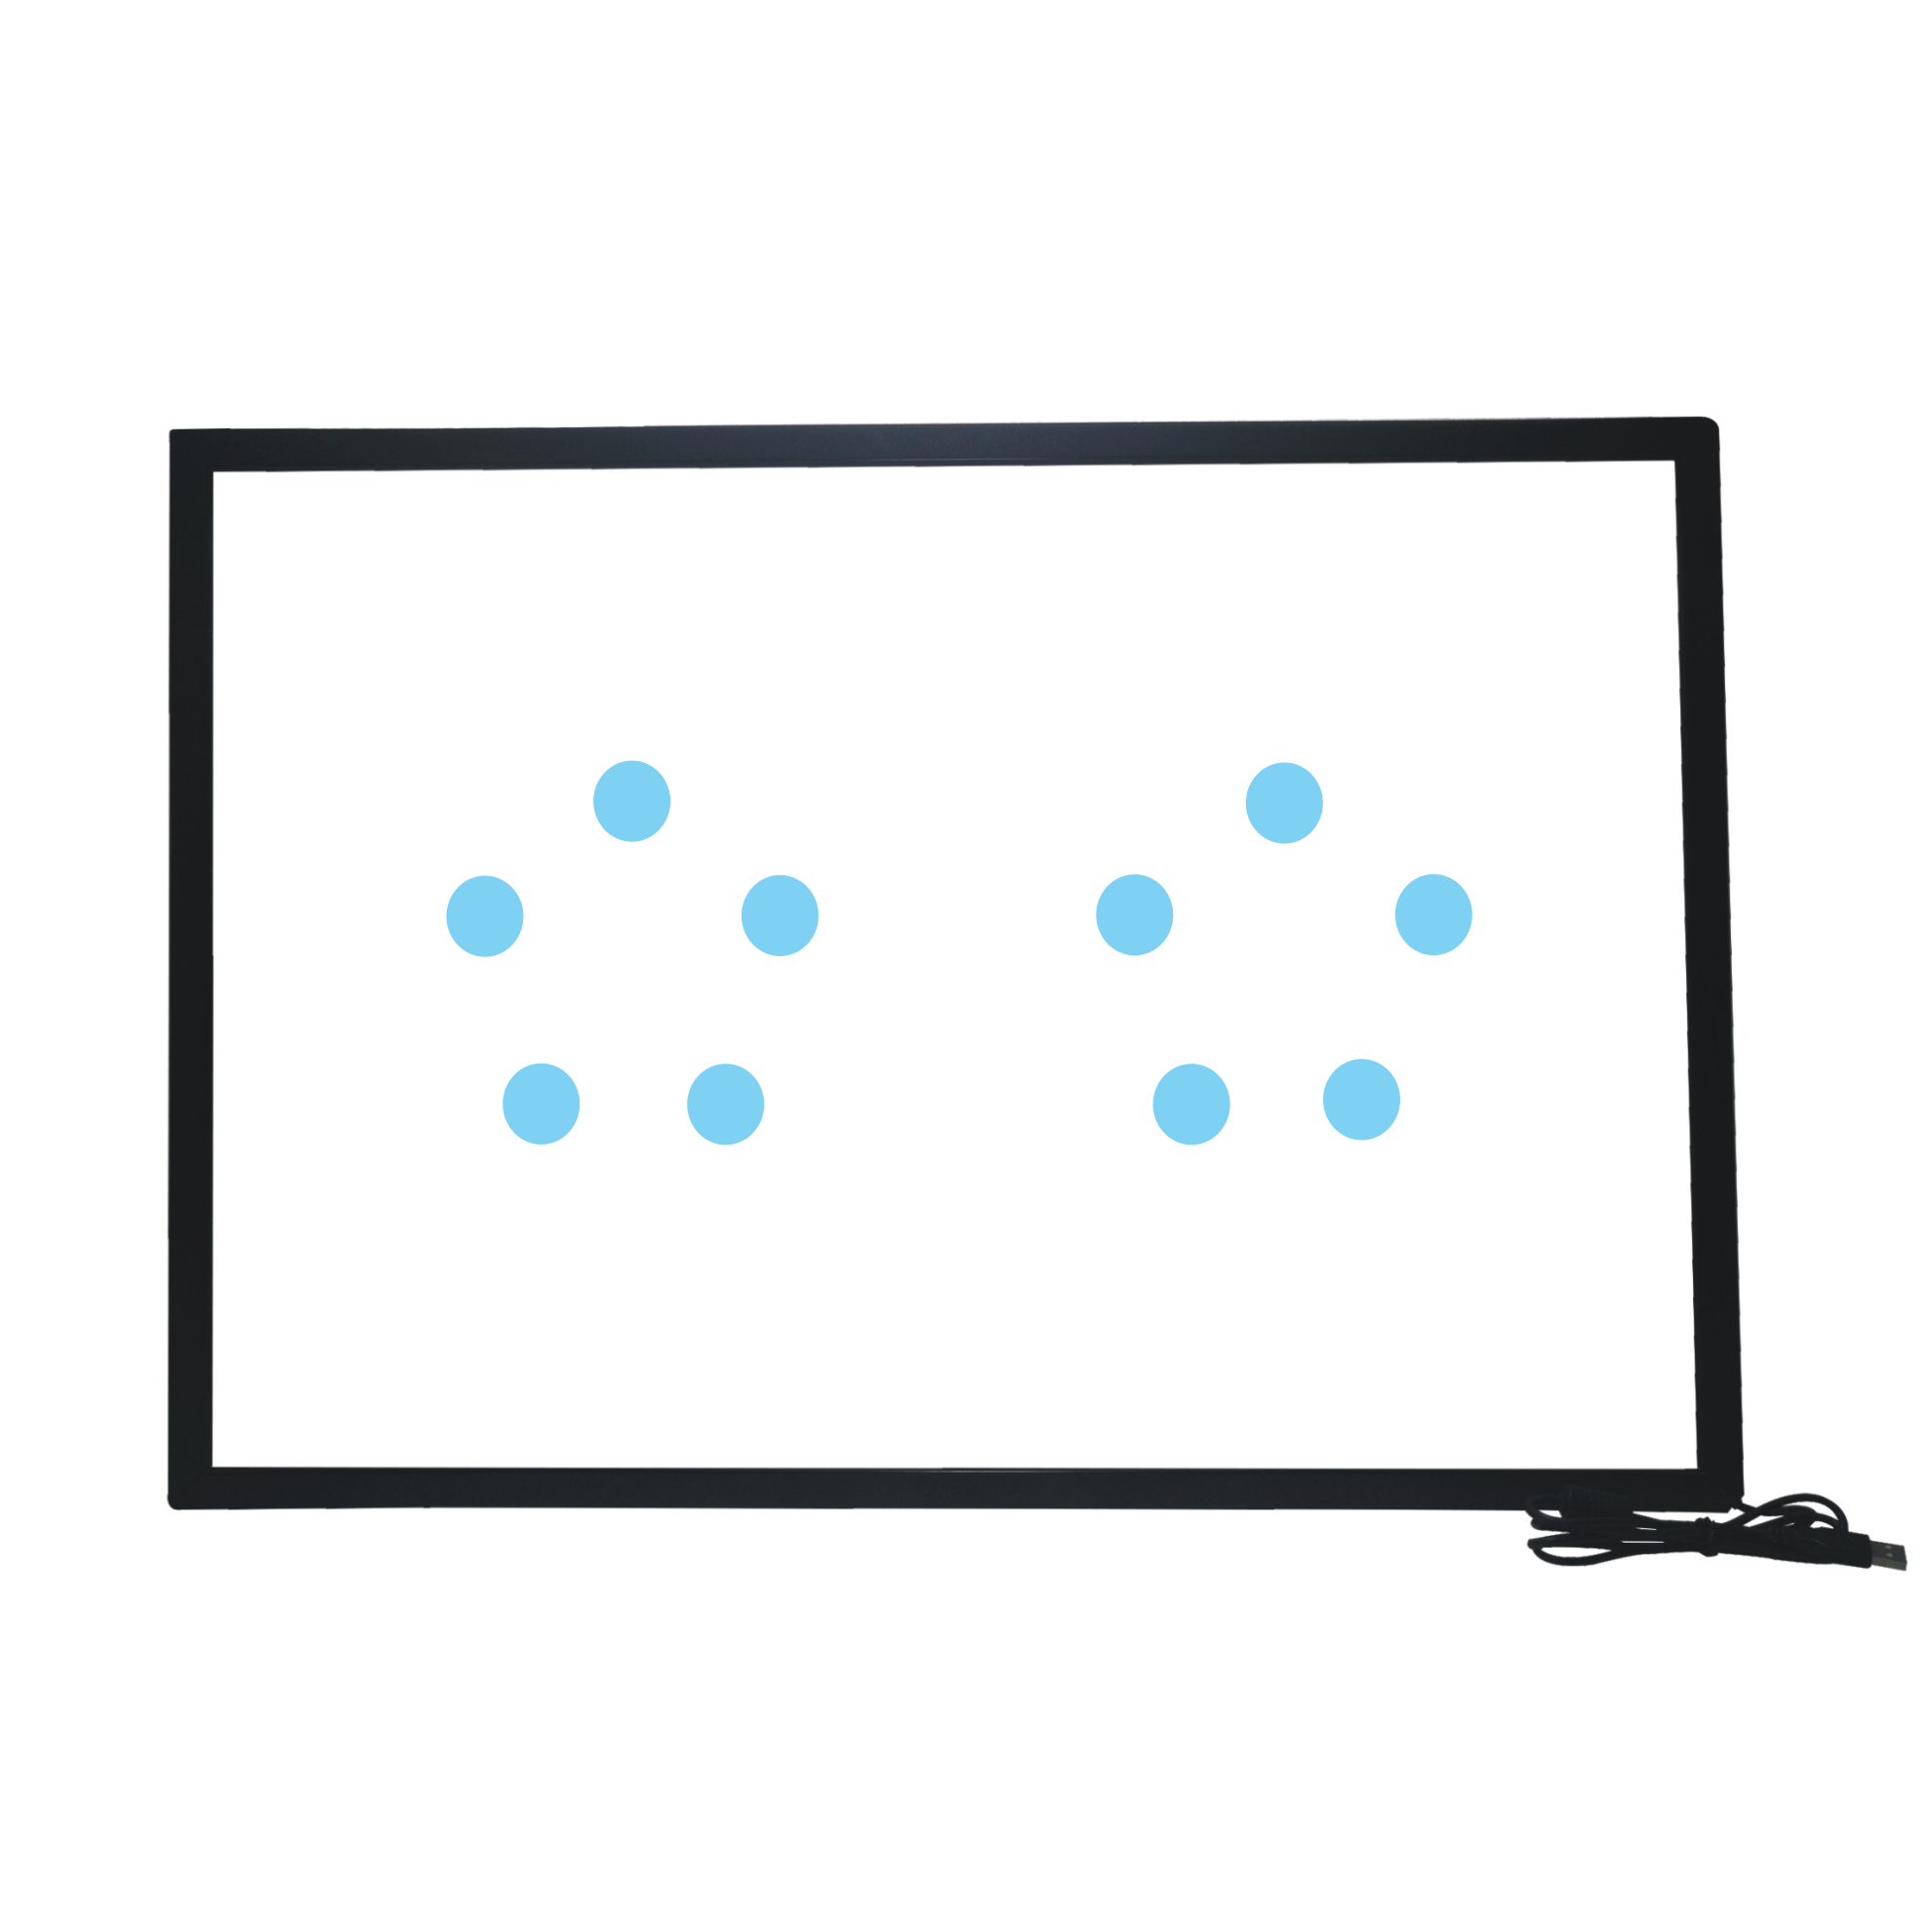  Deyowo 55 Inch 10 Points Interactive Infrared IR Touch